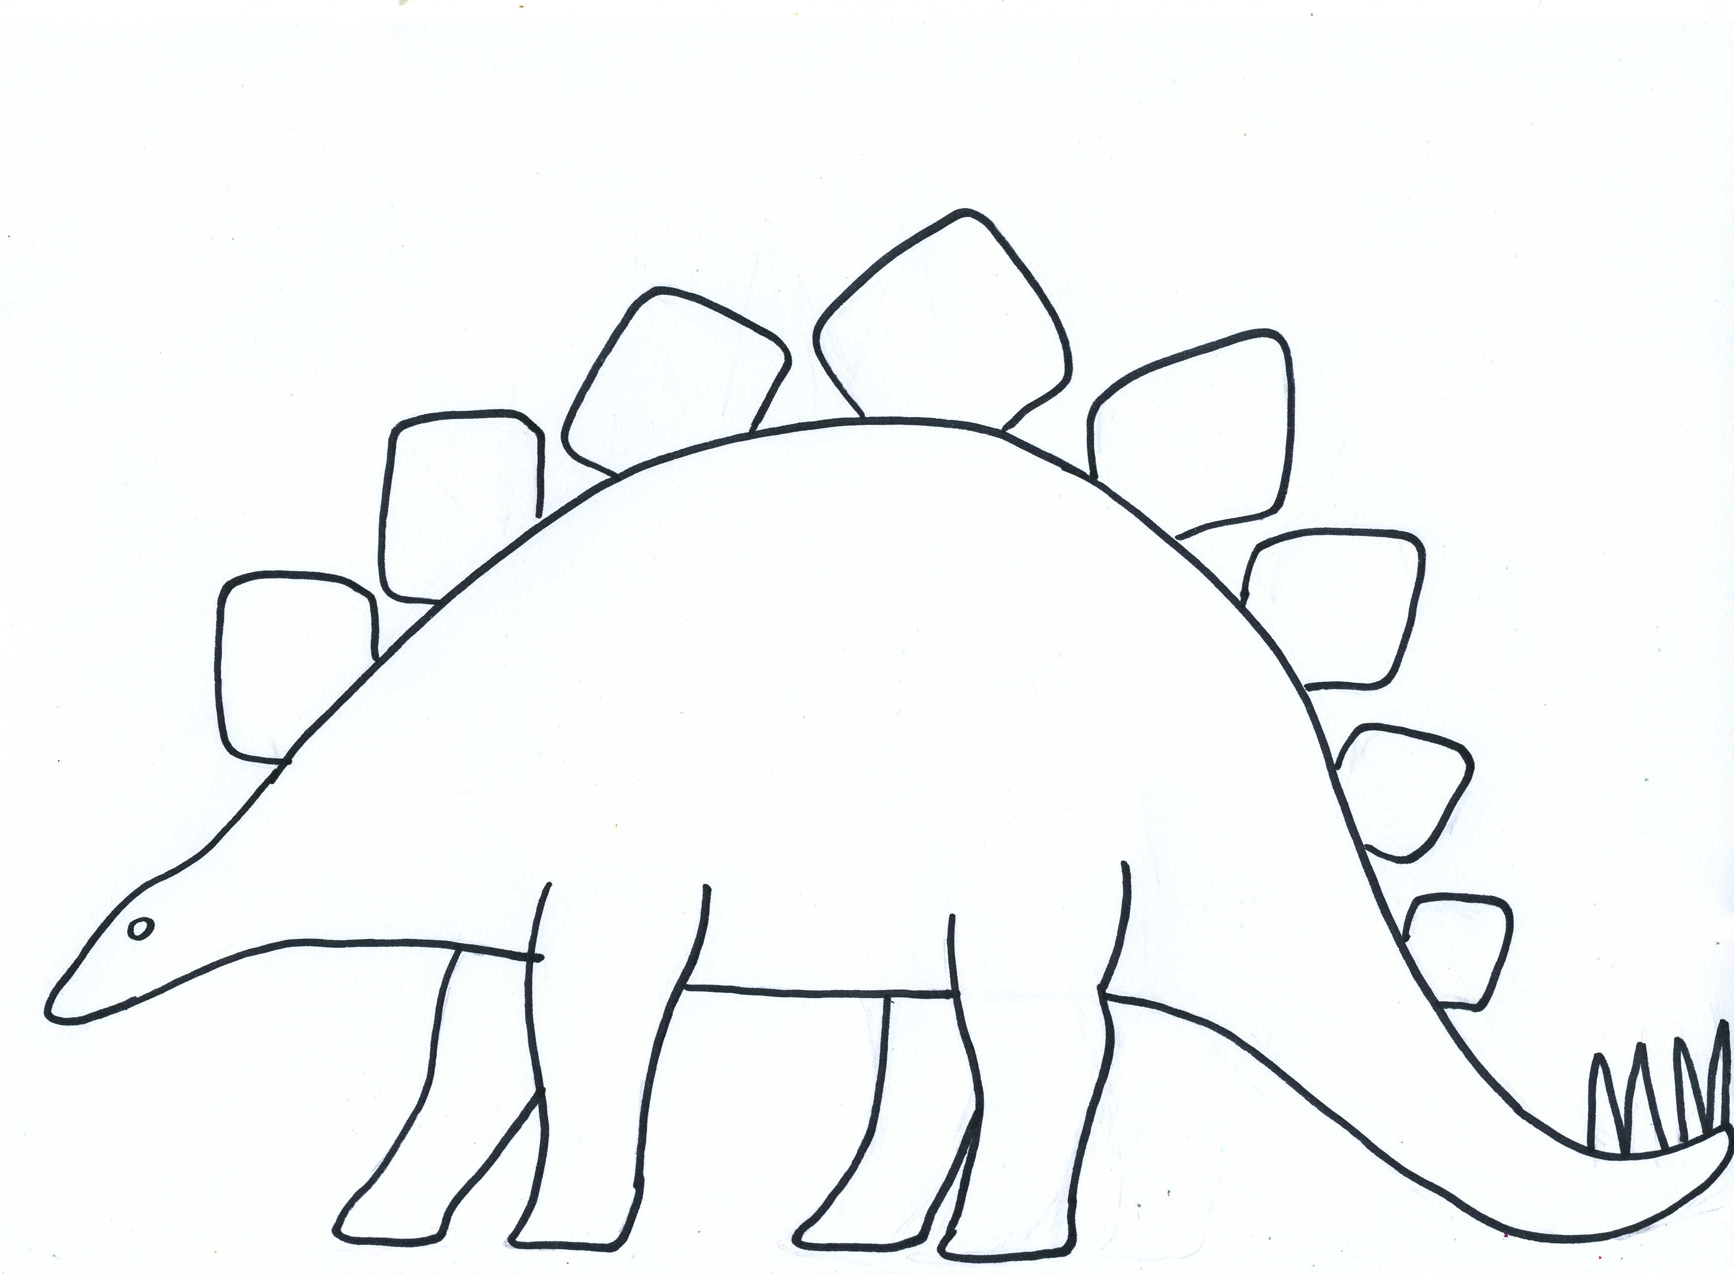 Dinosaur Outline Template Cliparts co